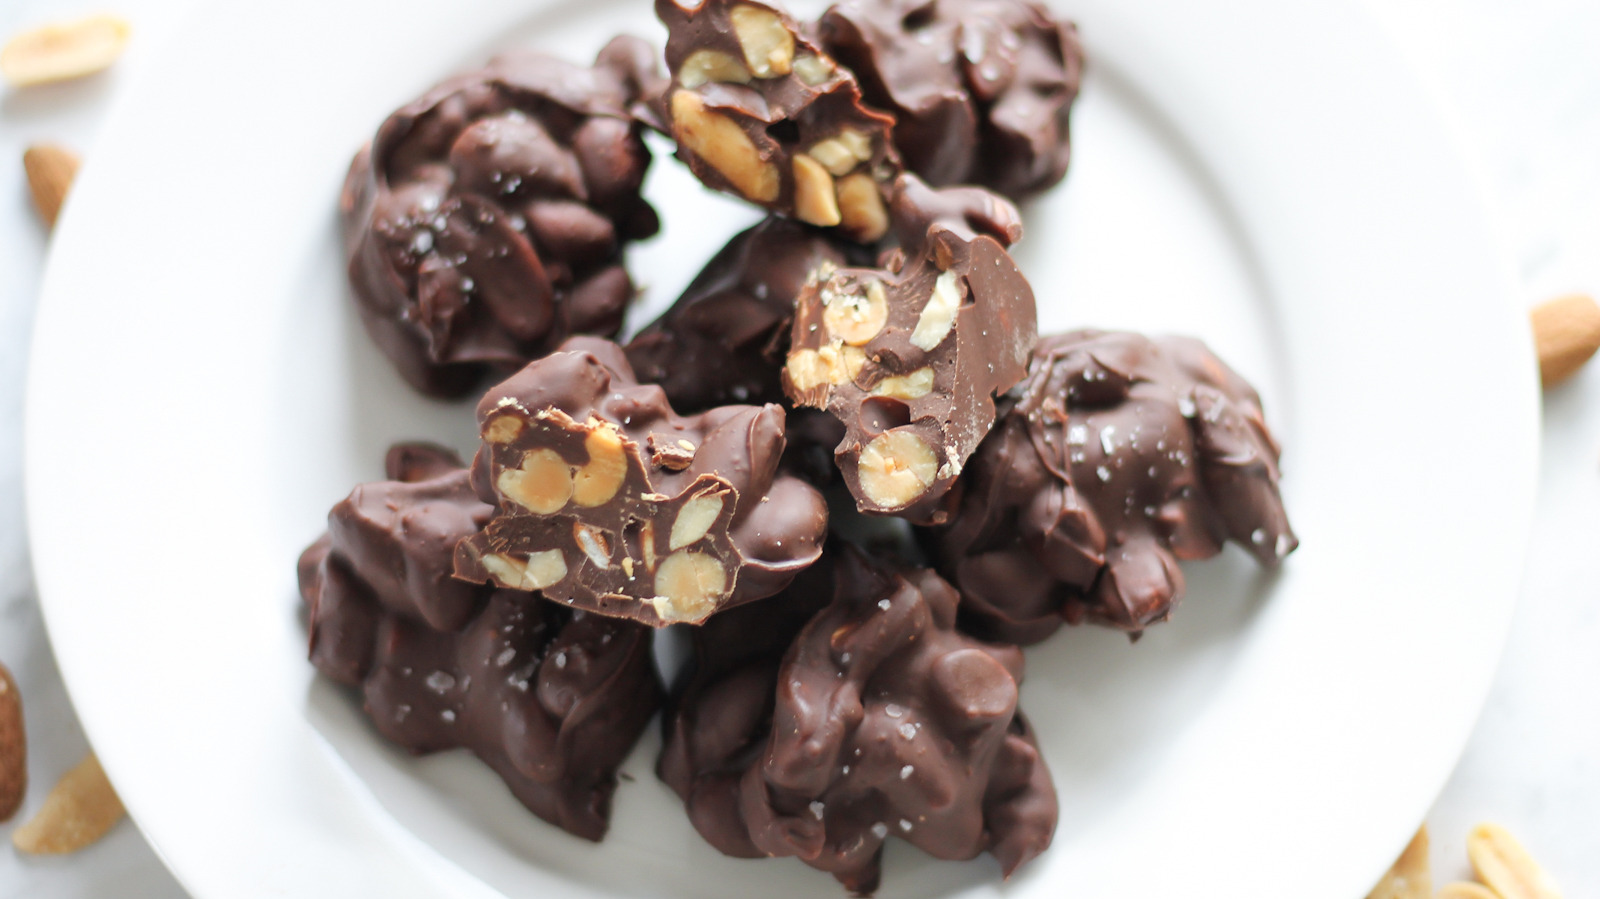 https://www.mashed.com/img/gallery/slow-cooker-chocolate-nut-clusters/l-intro-1622572506.jpg